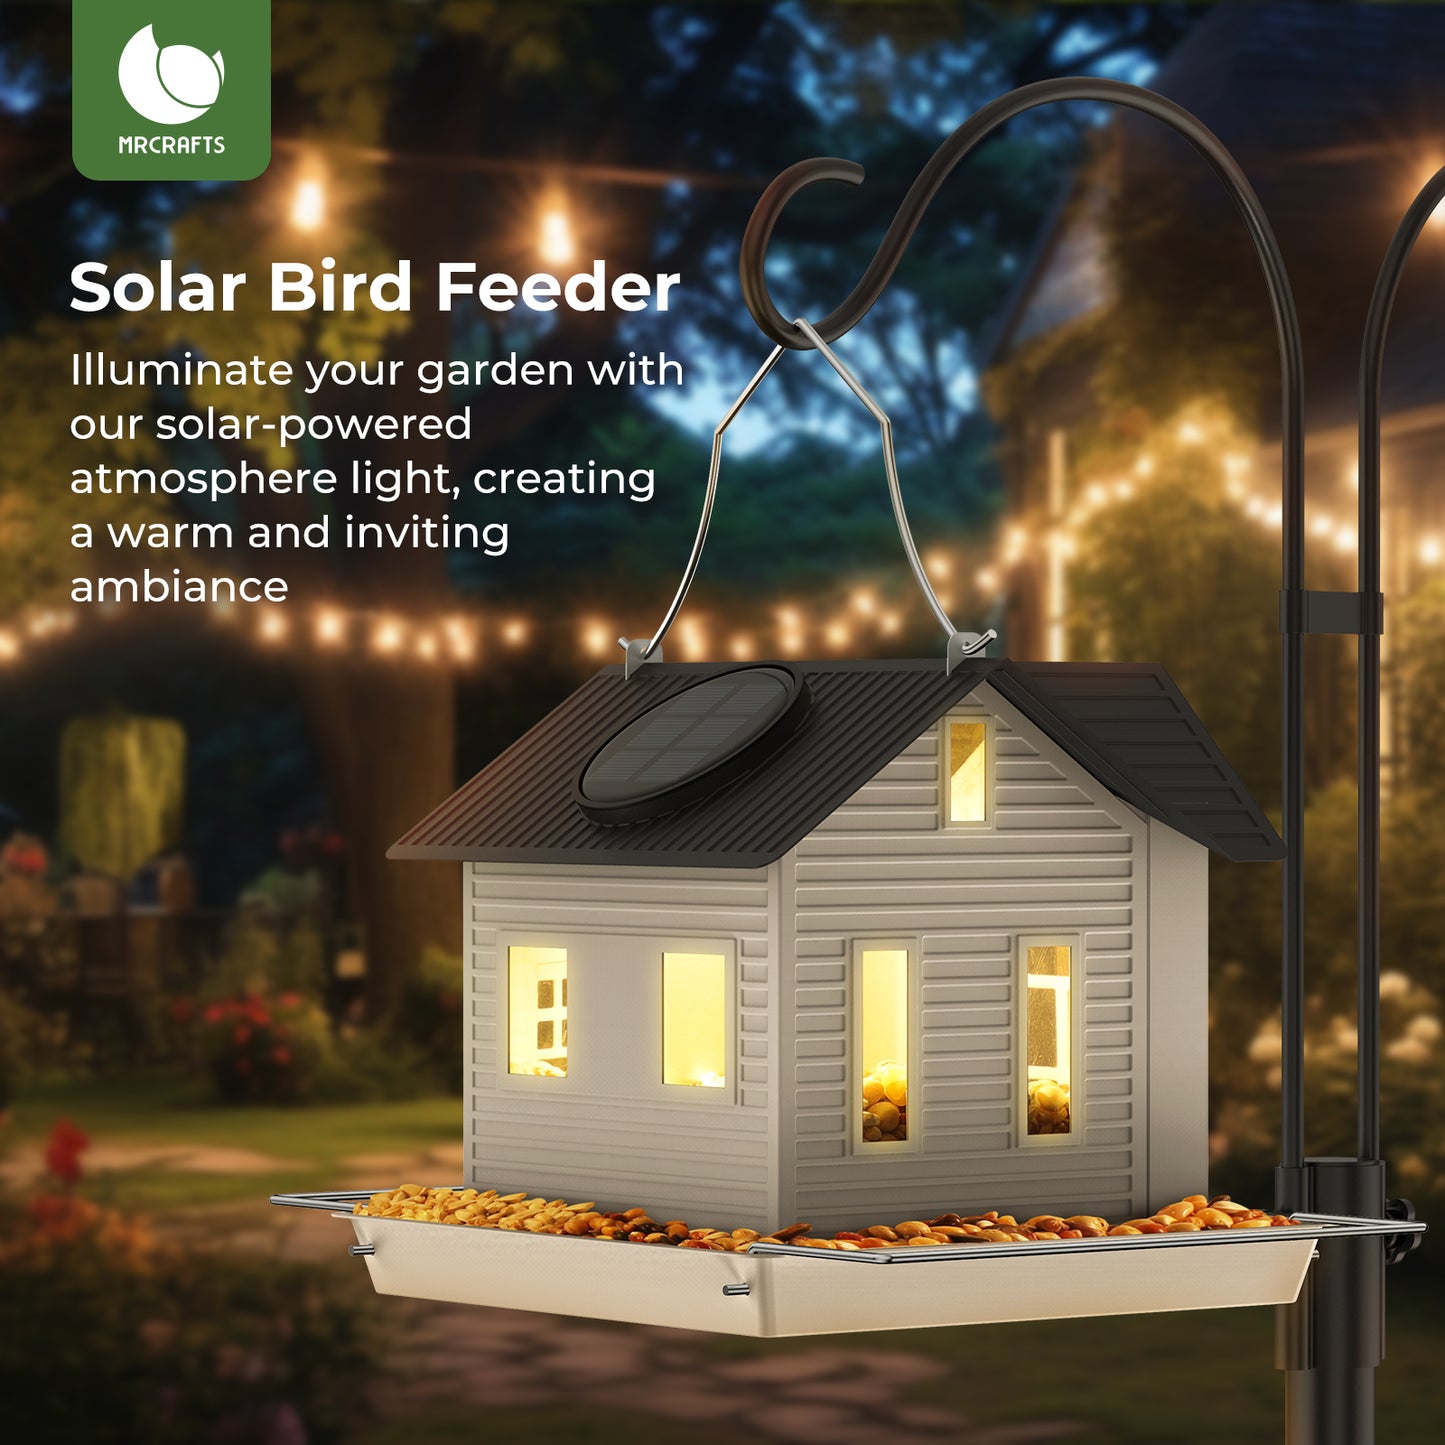 Solar Bird Feeder for Outside Hanging, Metal Solar Bird Feeders, Wild Bird Feeder House for Cardinals, Finches, Chickadees, Large Capacity, Weatherproof and Durable